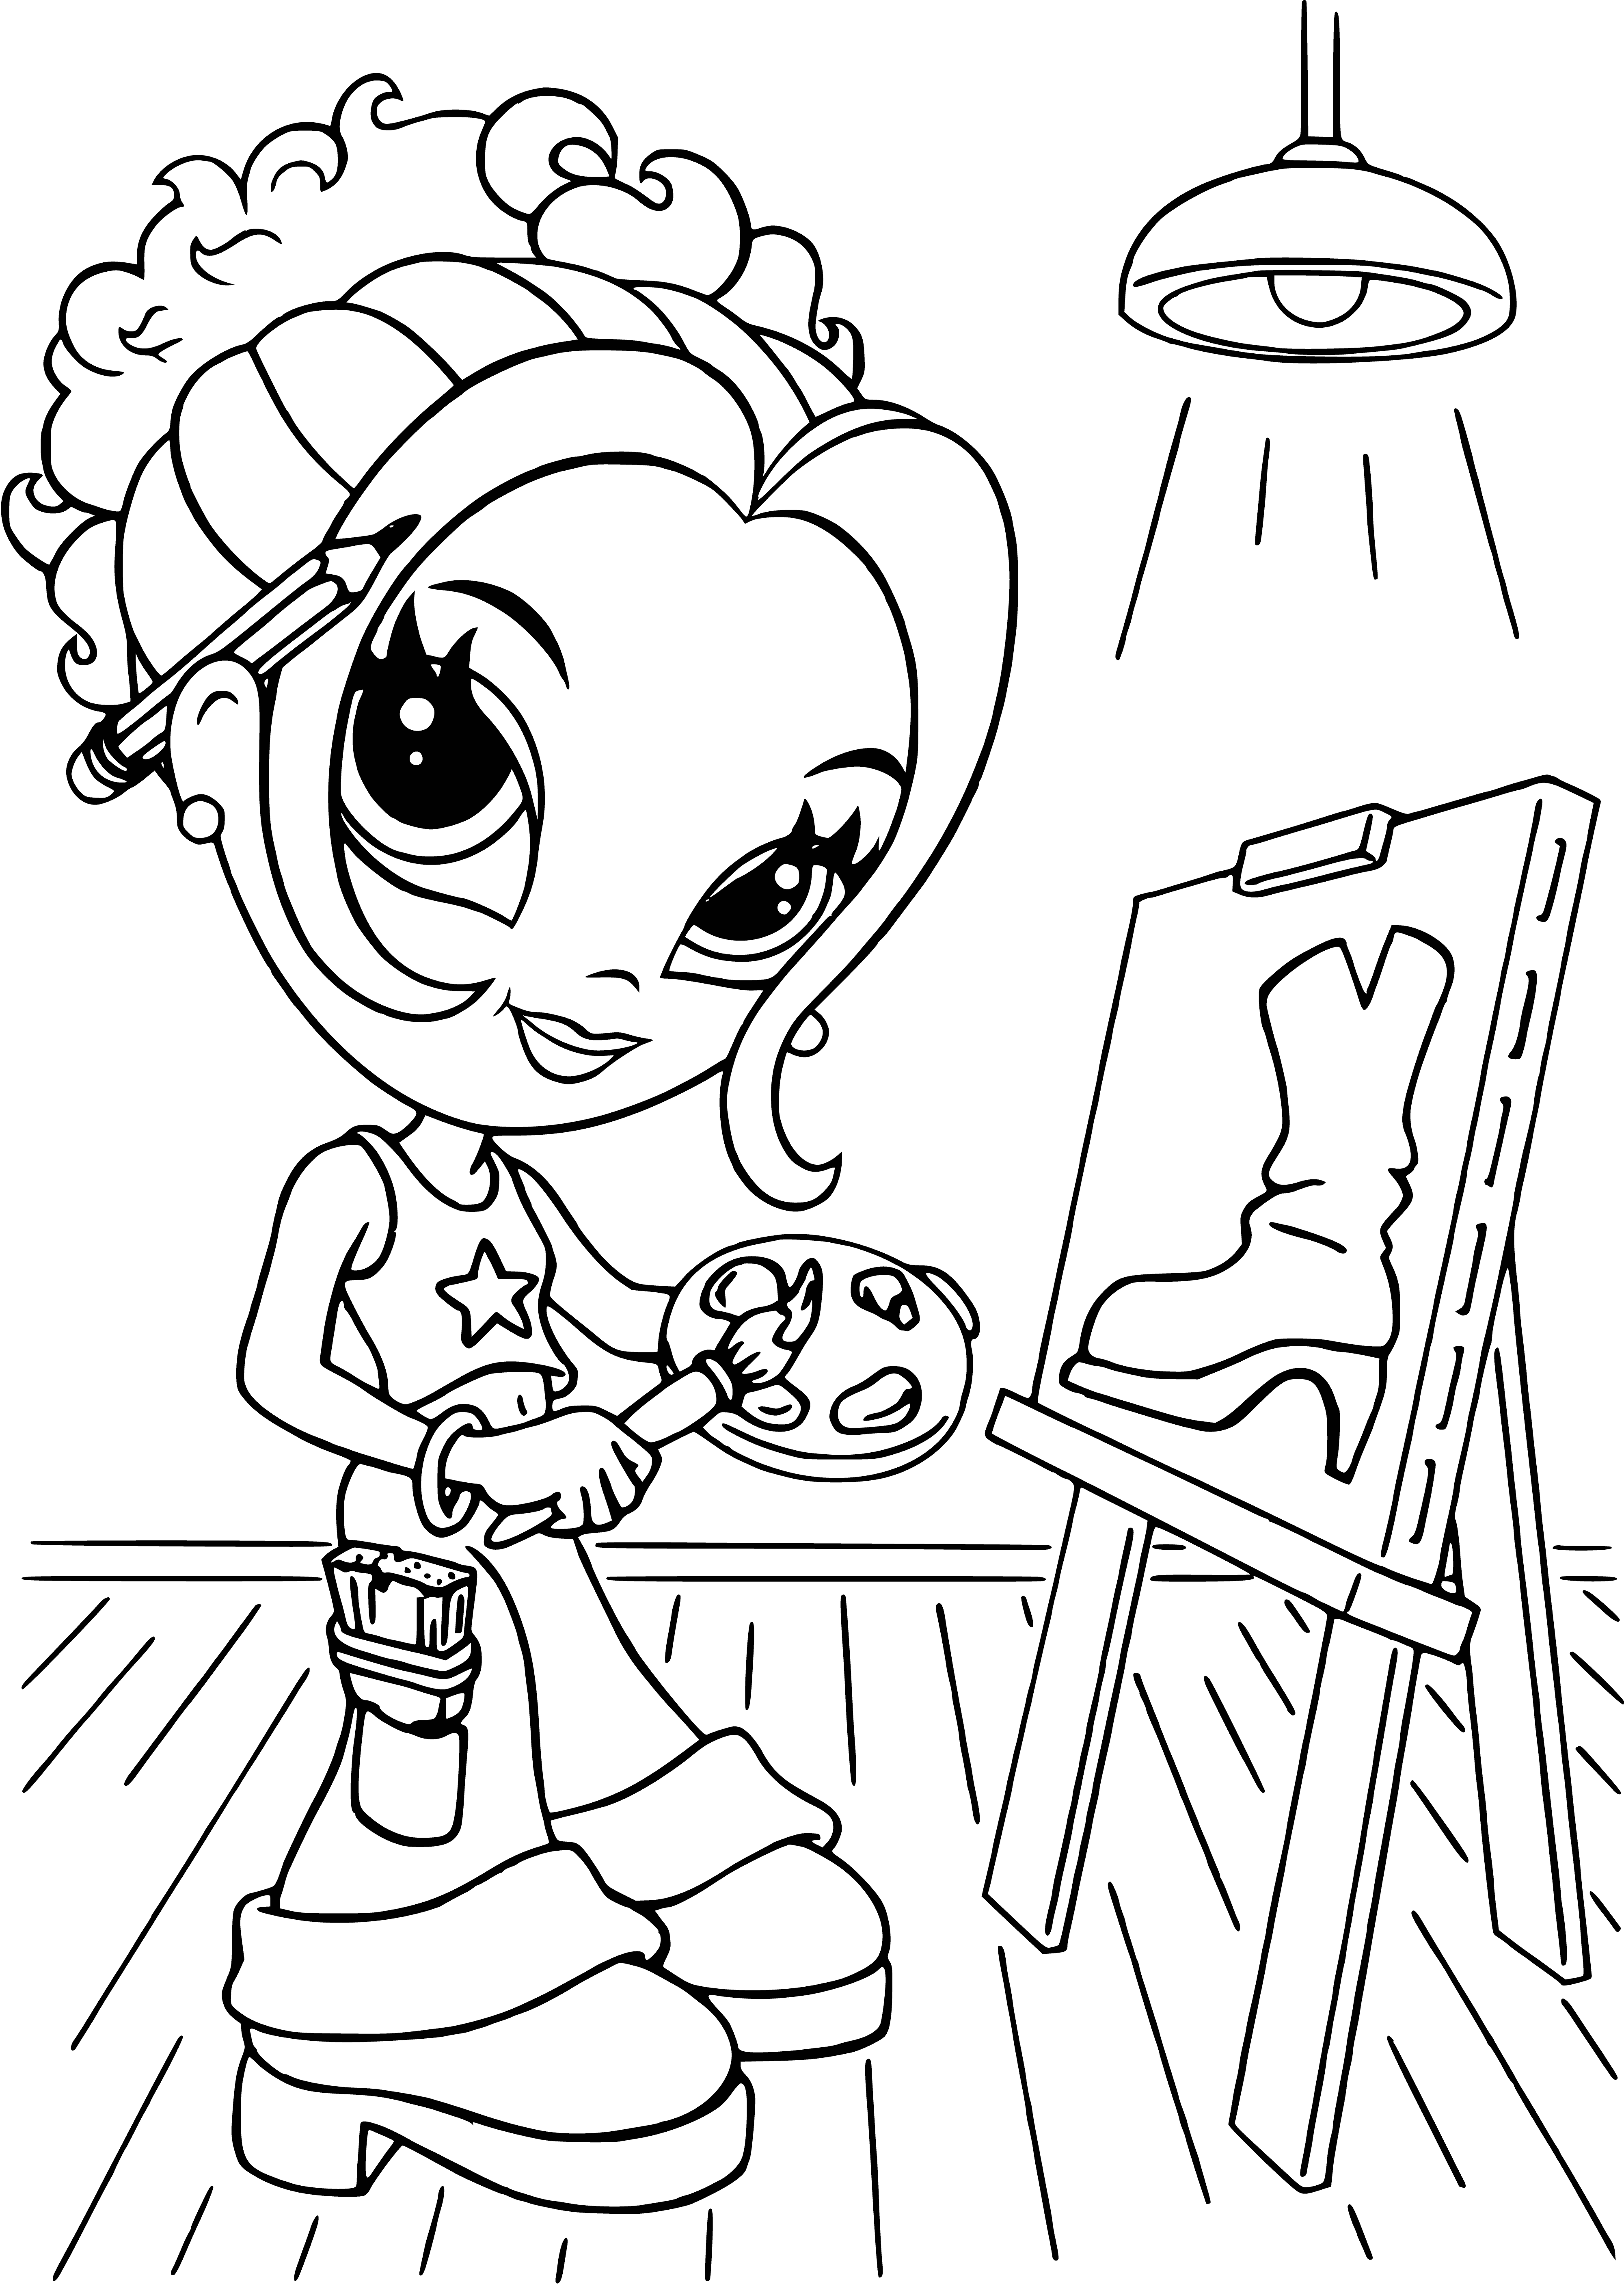 coloring page: Girl in pink dress ready for a night out looks glamorous in Lisa Frank coloring page. #glitter #dressup #coloring